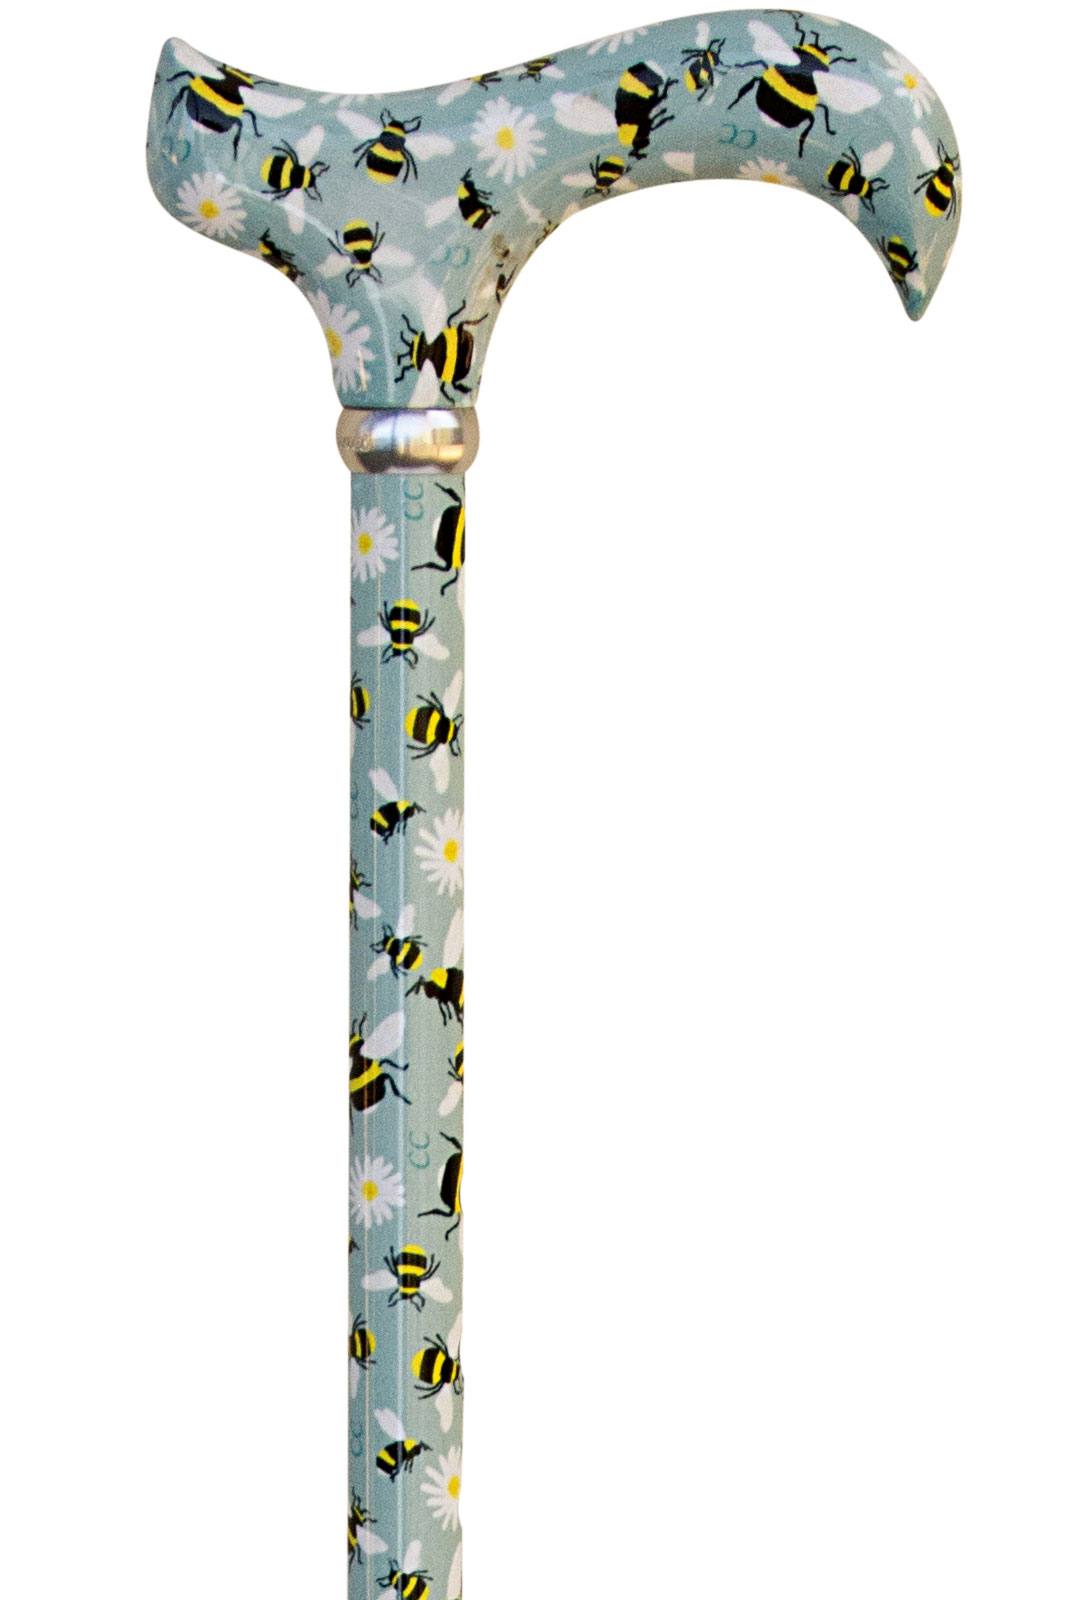 Classic Canes Derby Adjustable Walking Stick - Bees